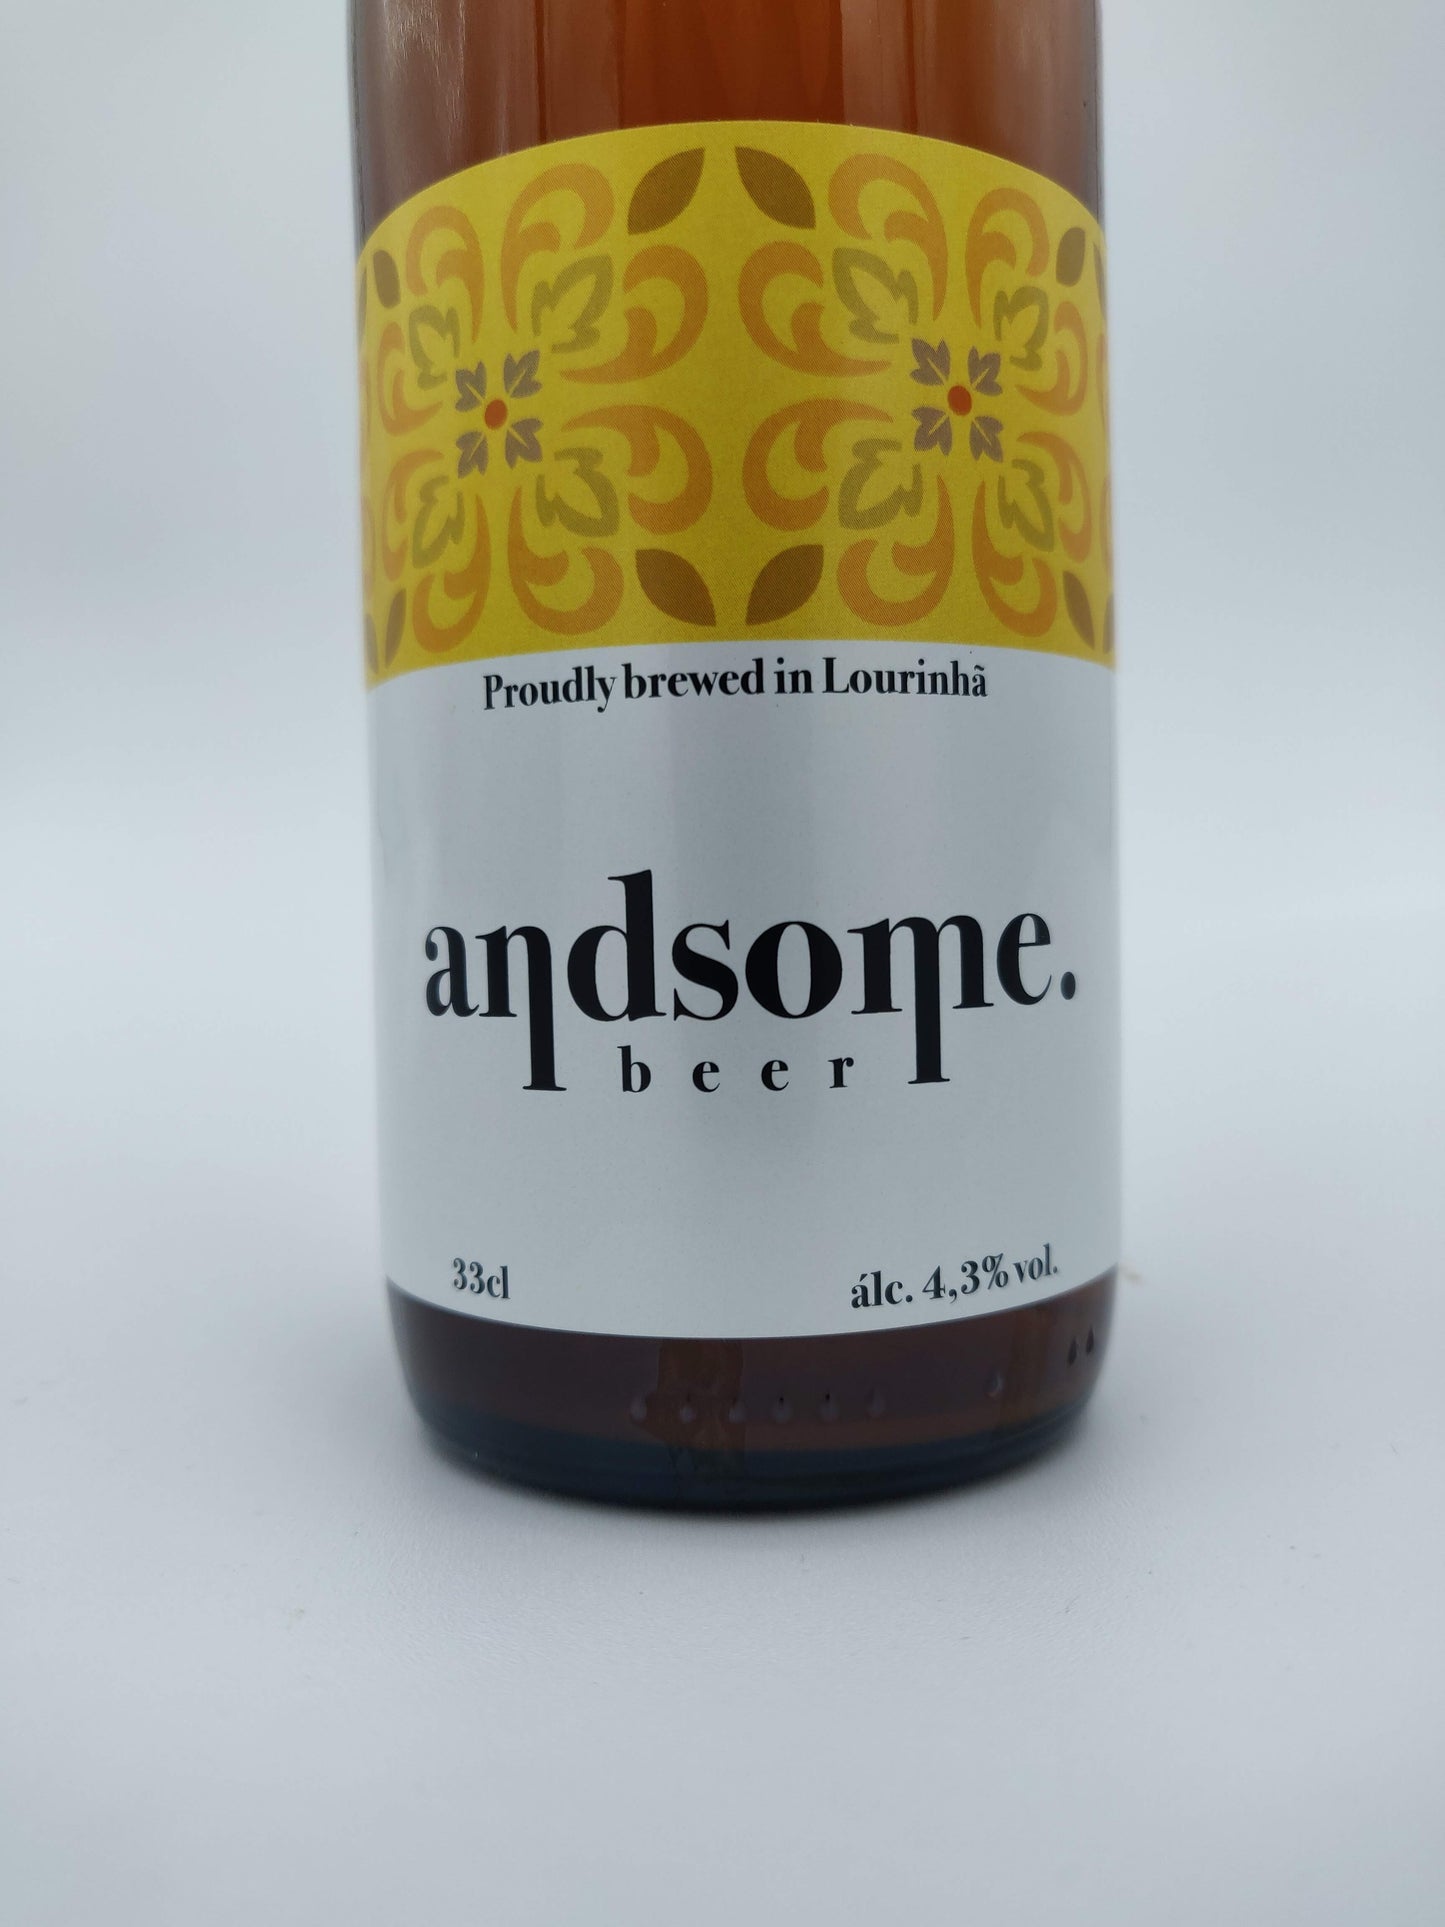 andsome beer pale ale is 4.3%